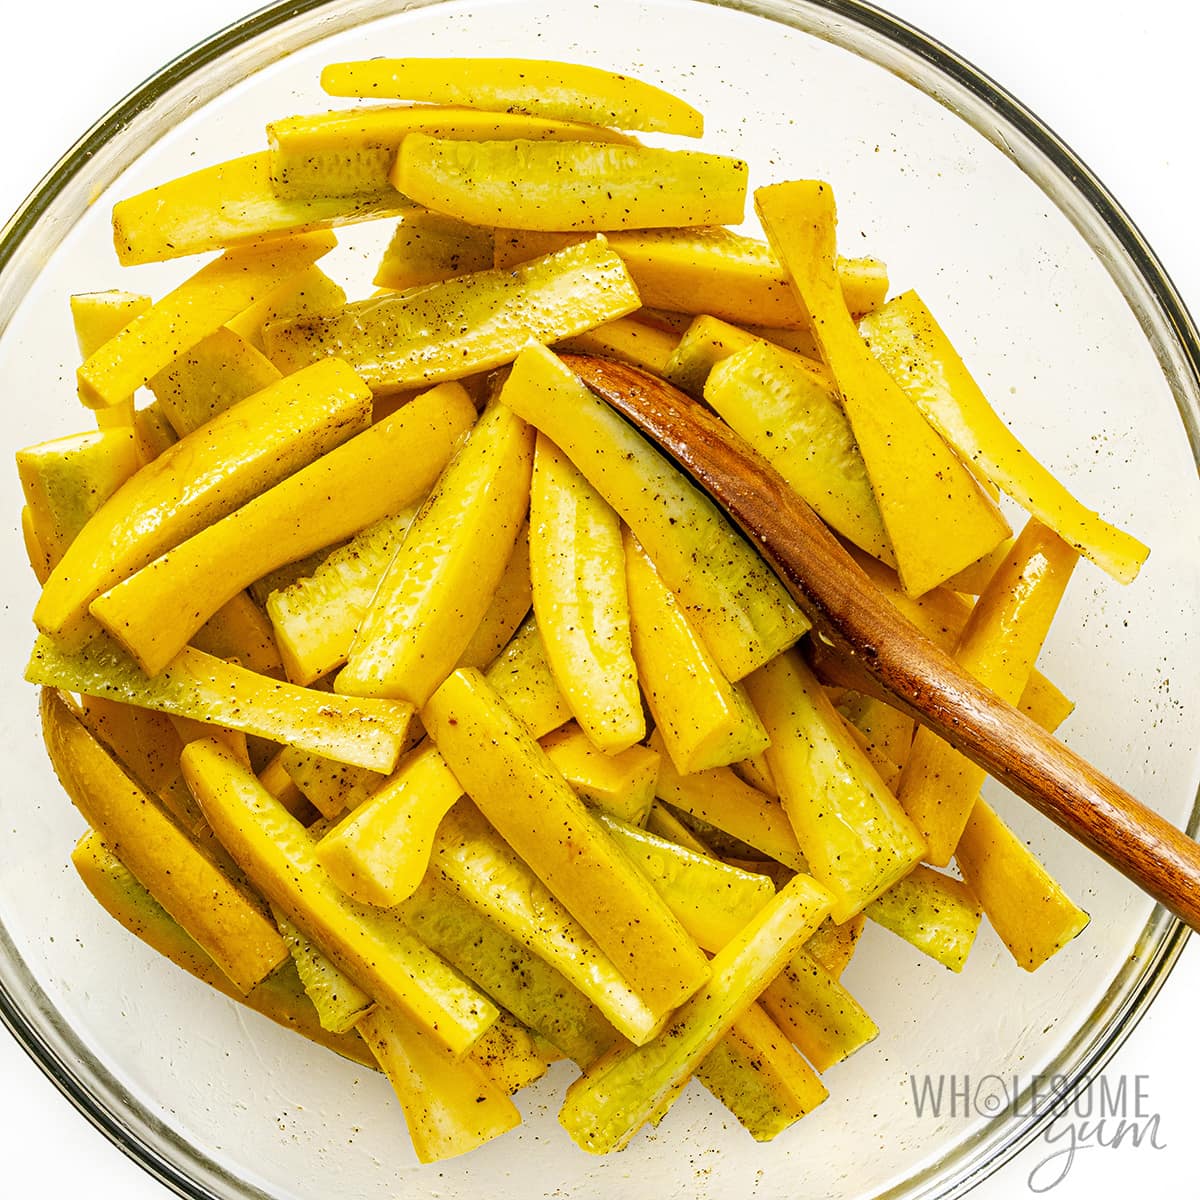 Seasoned strips of squash in a bowl.